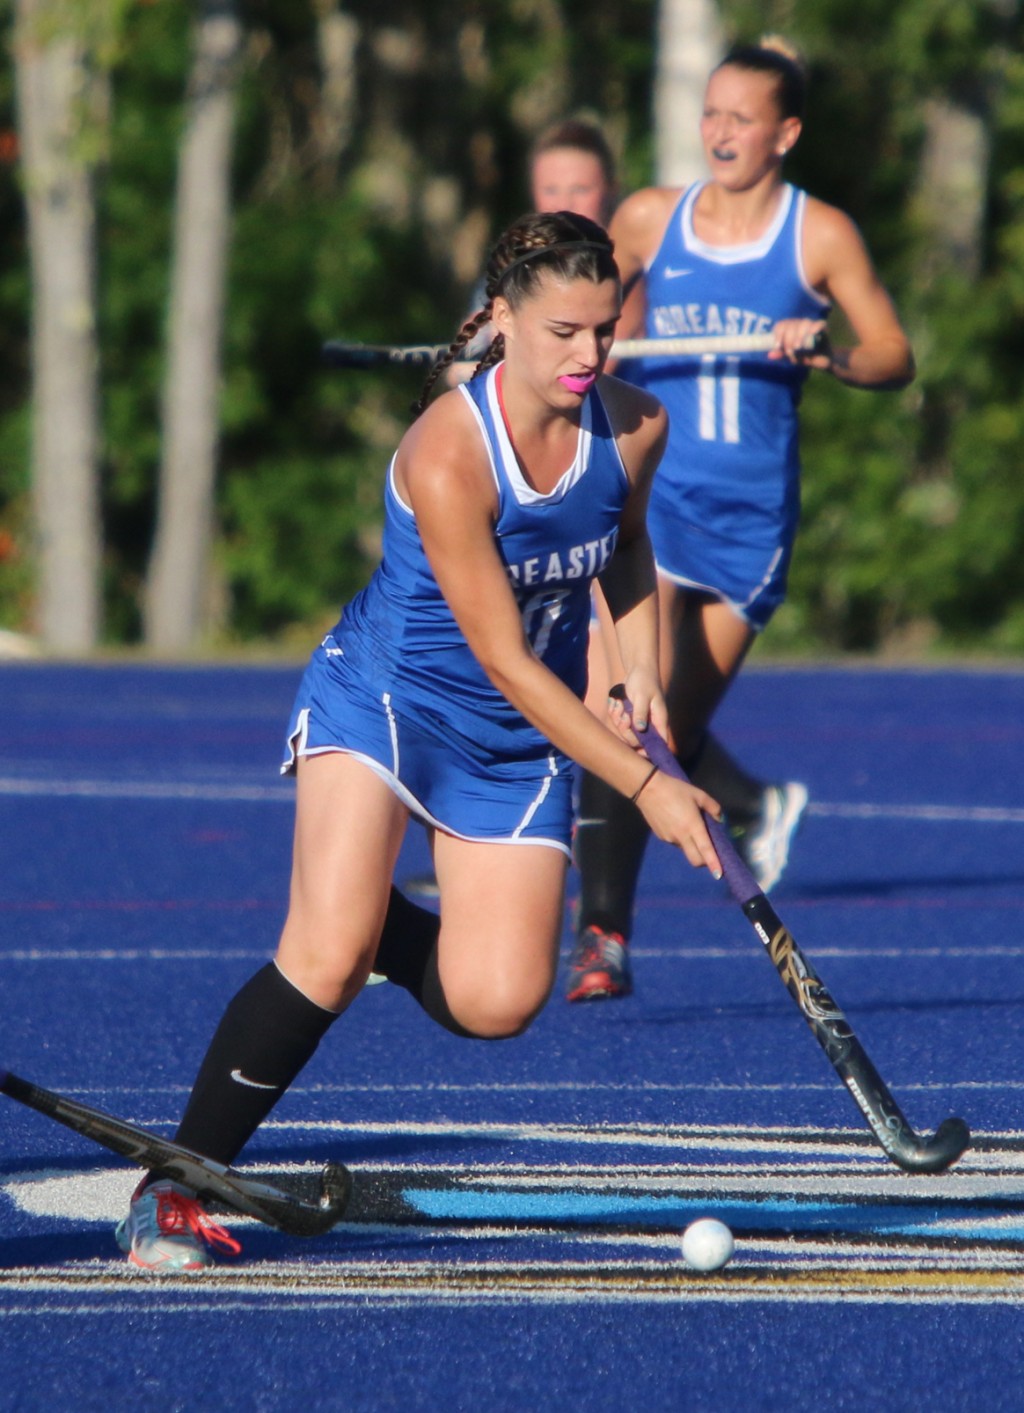 A player controls the ball during a women's field hockey game